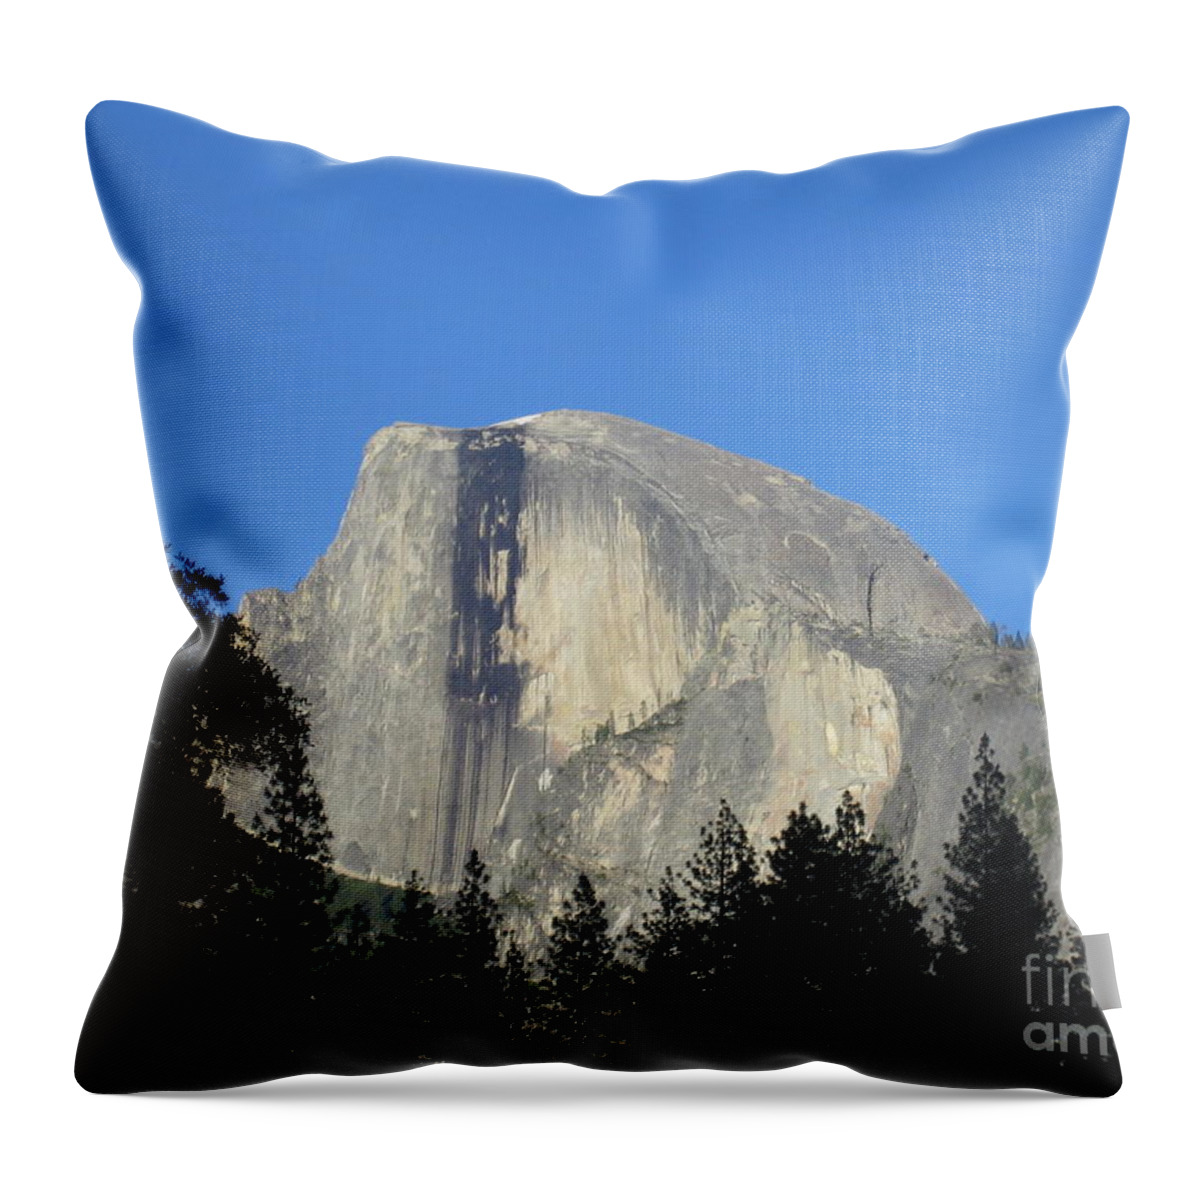 Yosemite Throw Pillow featuring the photograph Yosemite National Park Half Dome Rock Close Up View on A Clear Day by John Shiron